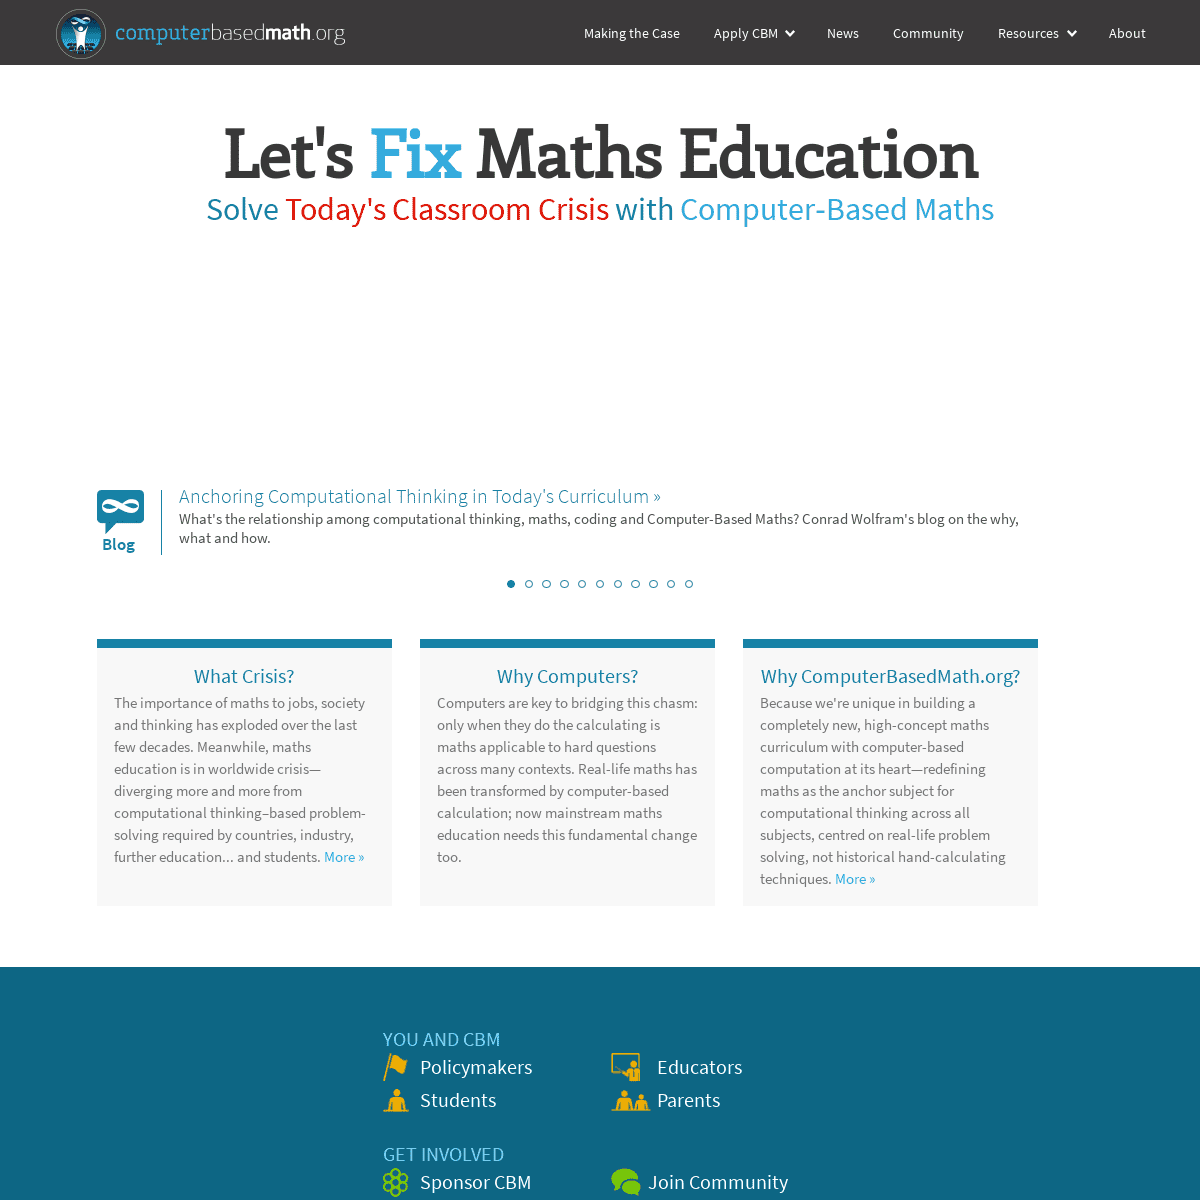 A complete backup of computerbasedmath.org